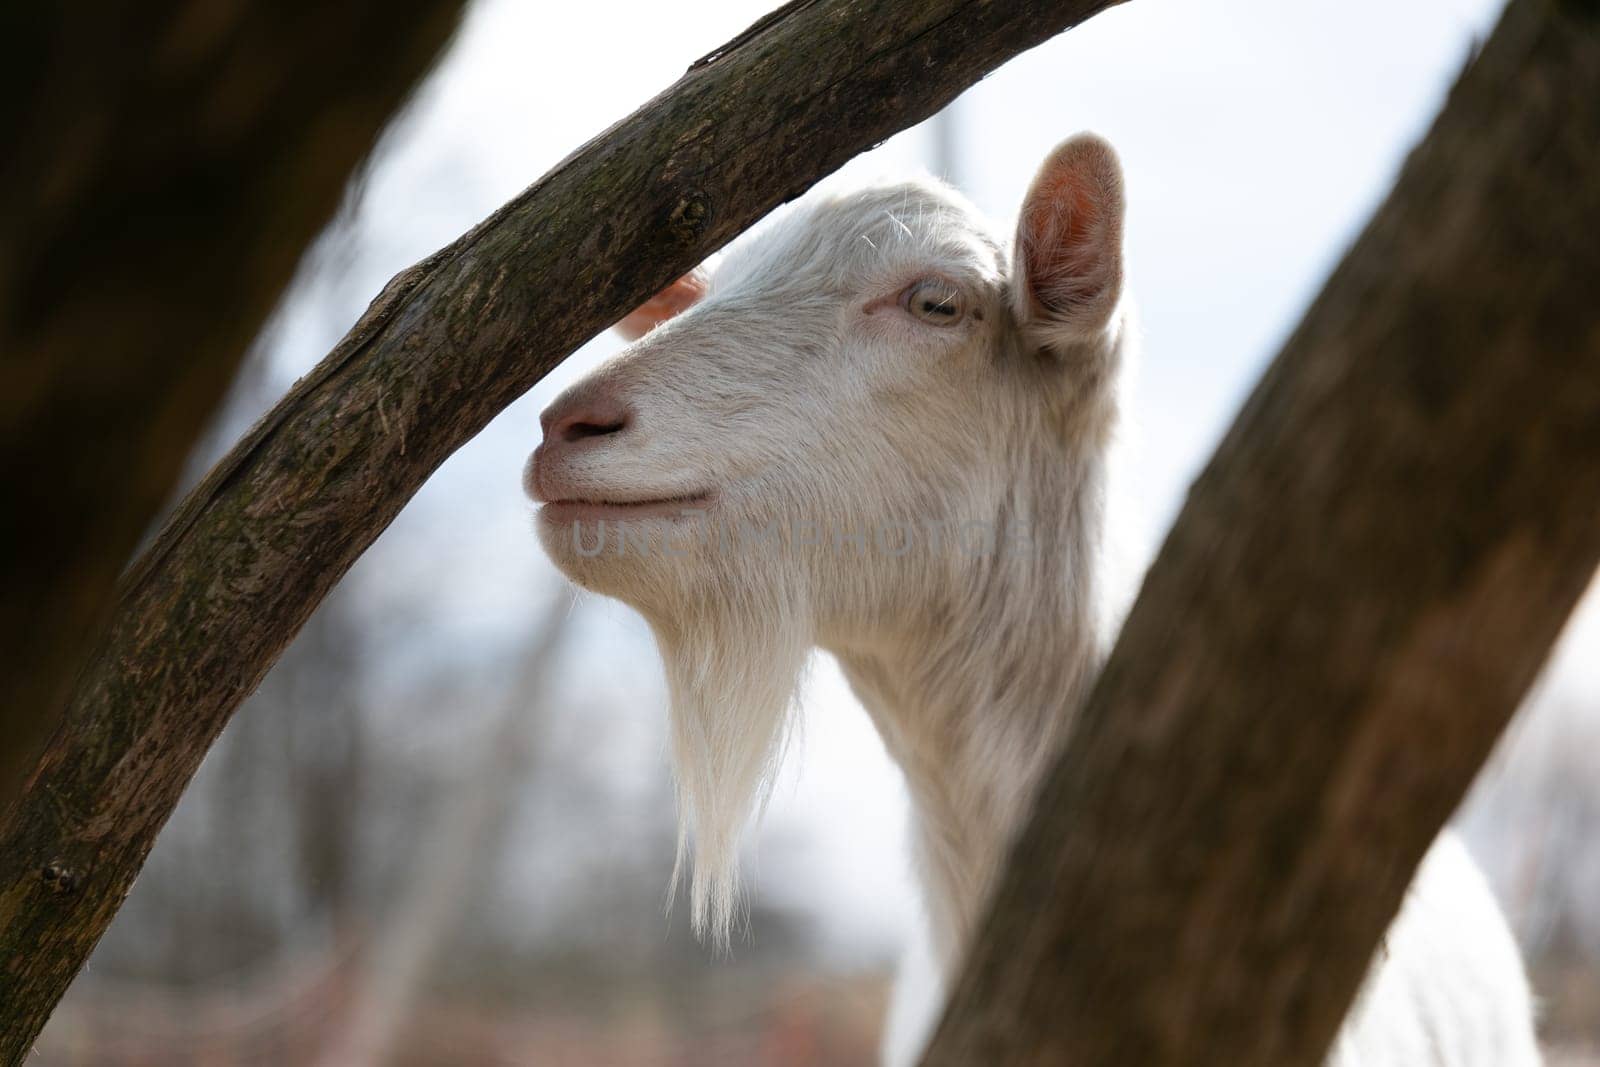 A close-up view of a goat standing behind a tree, partially obscured by the foliage. The goats fur is a mixture of white and brown, and its horn is visible.